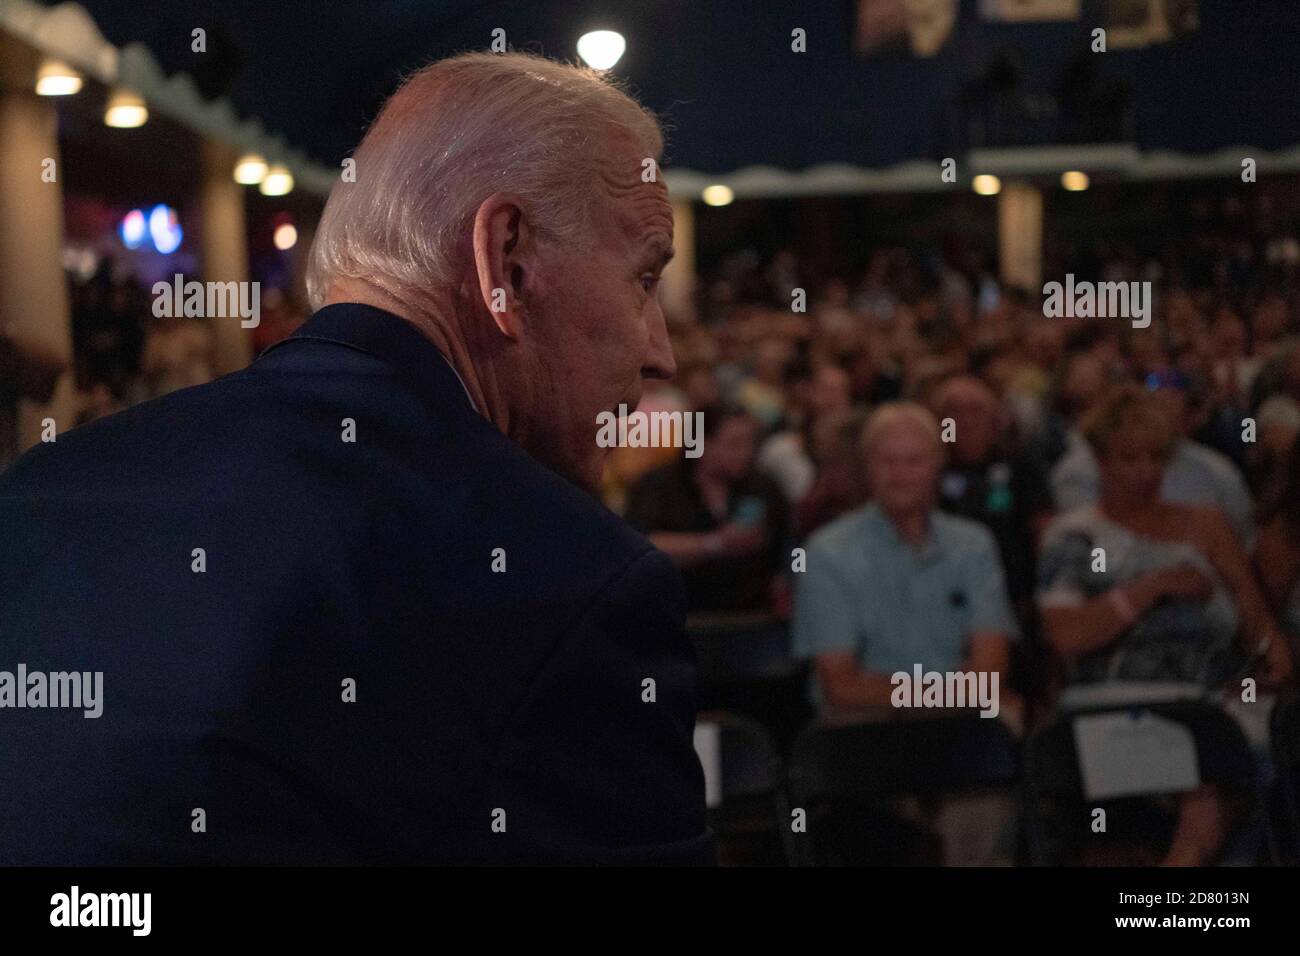 2020 Democratic presidential hopeful former Vice President Joe Biden attends the Wing Ding Dinner on August 9, 2019 in Clear Lake, Iowa. The dinner has become a must attend for Democratic presidential hopefuls ahead of the of Iowa Caucus. Credit: Alex Edelman/The Photo Access Stock Photo